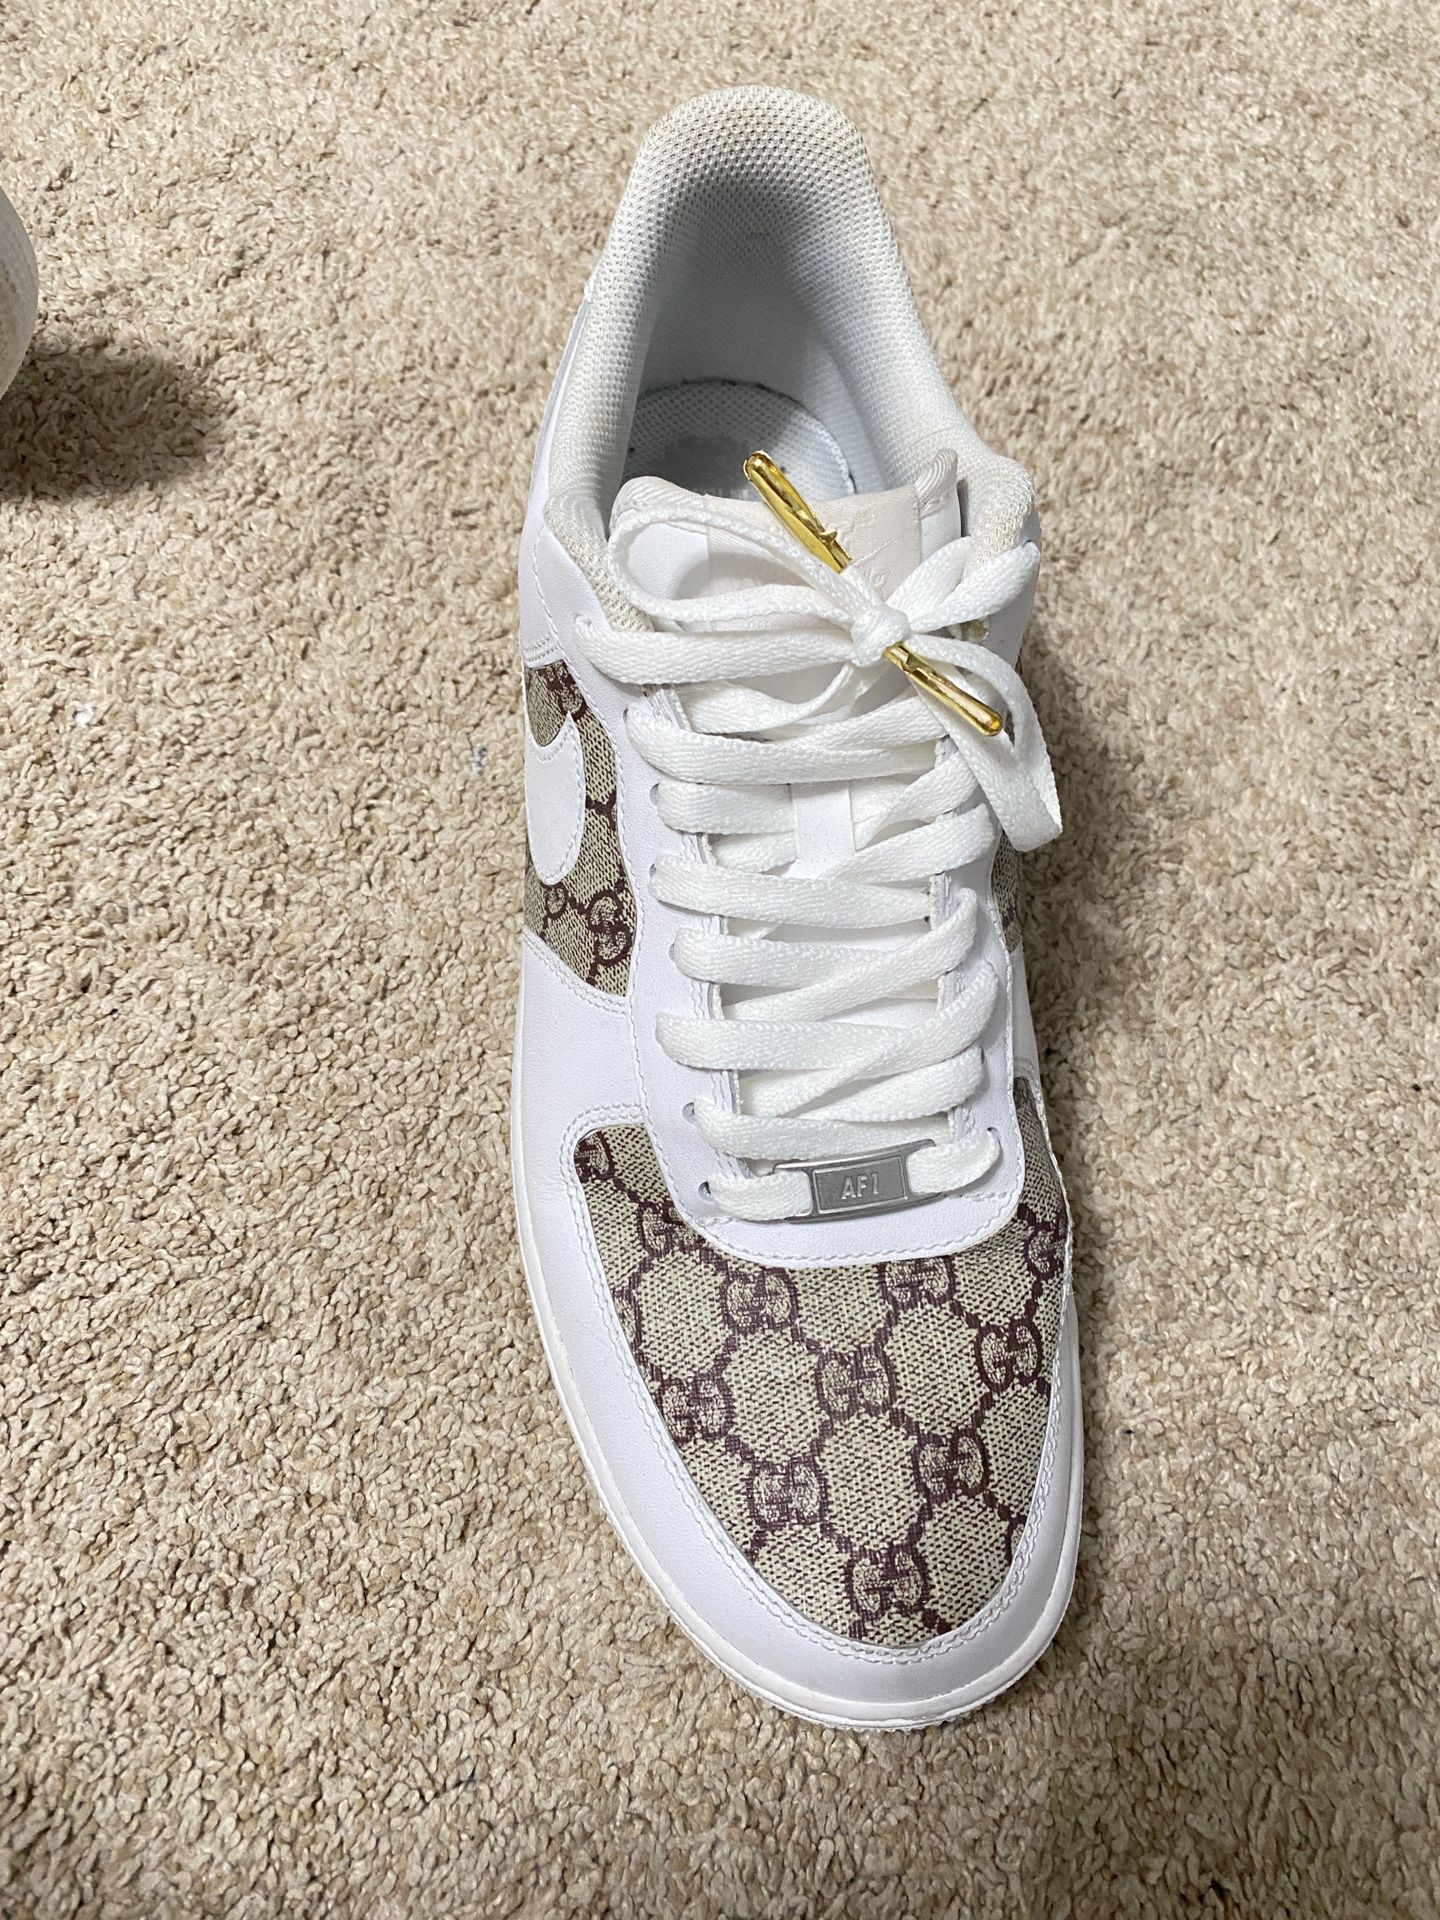 Gucci Air Force 1s (11.5)